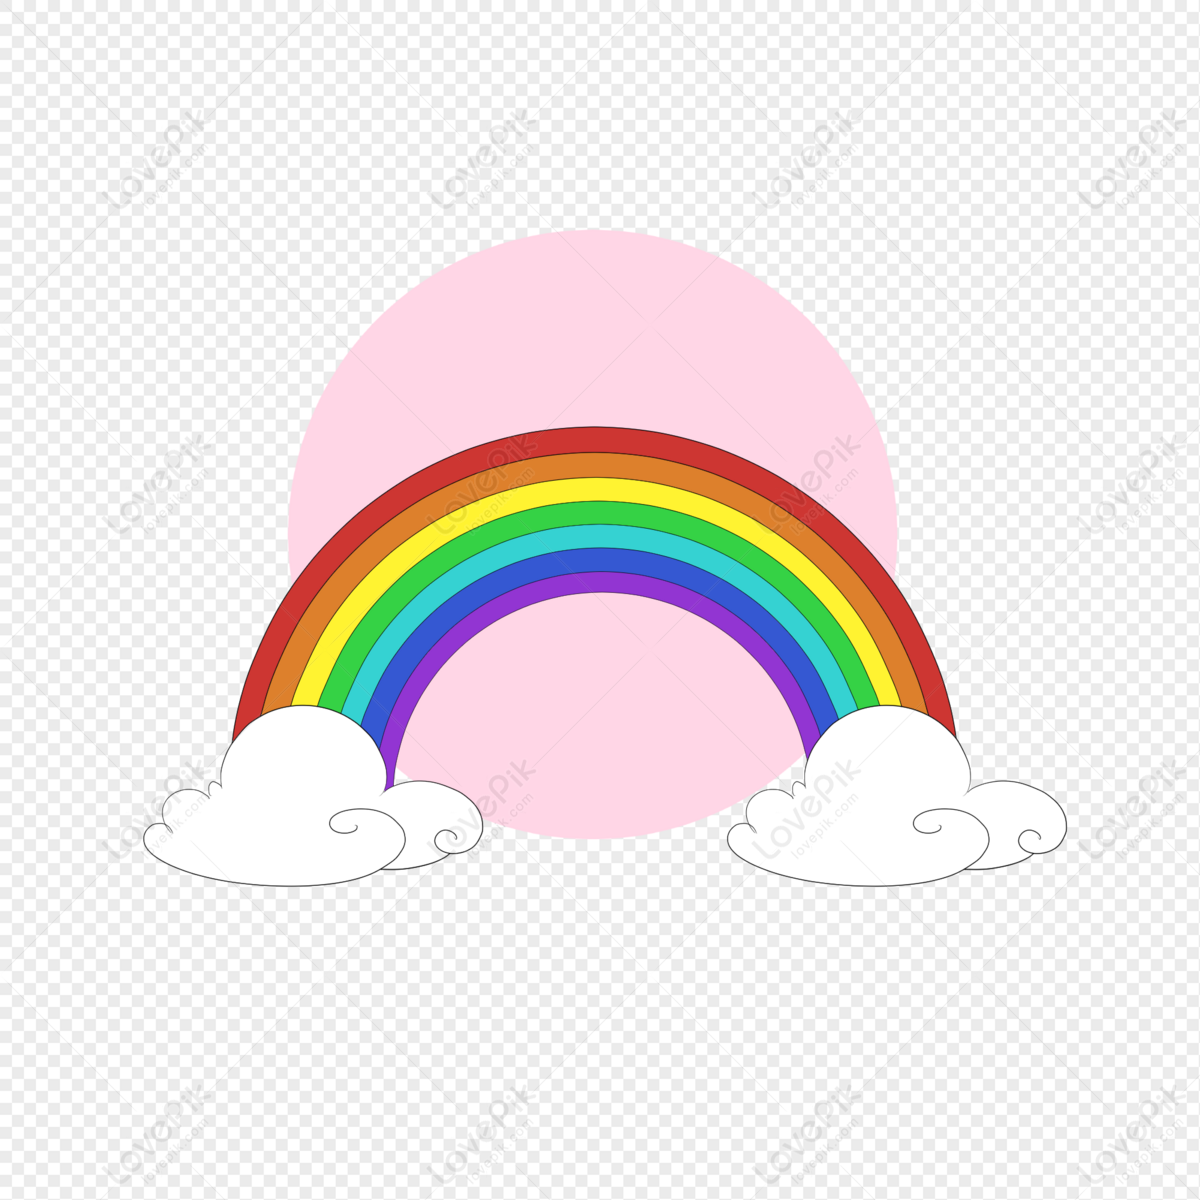 Cartoon Hand Painted Small Fresh Creative Cute Rainbow Clouds Pi PNG Image  Free Download And Clipart Image For Free Download - Lovepik | 401145291